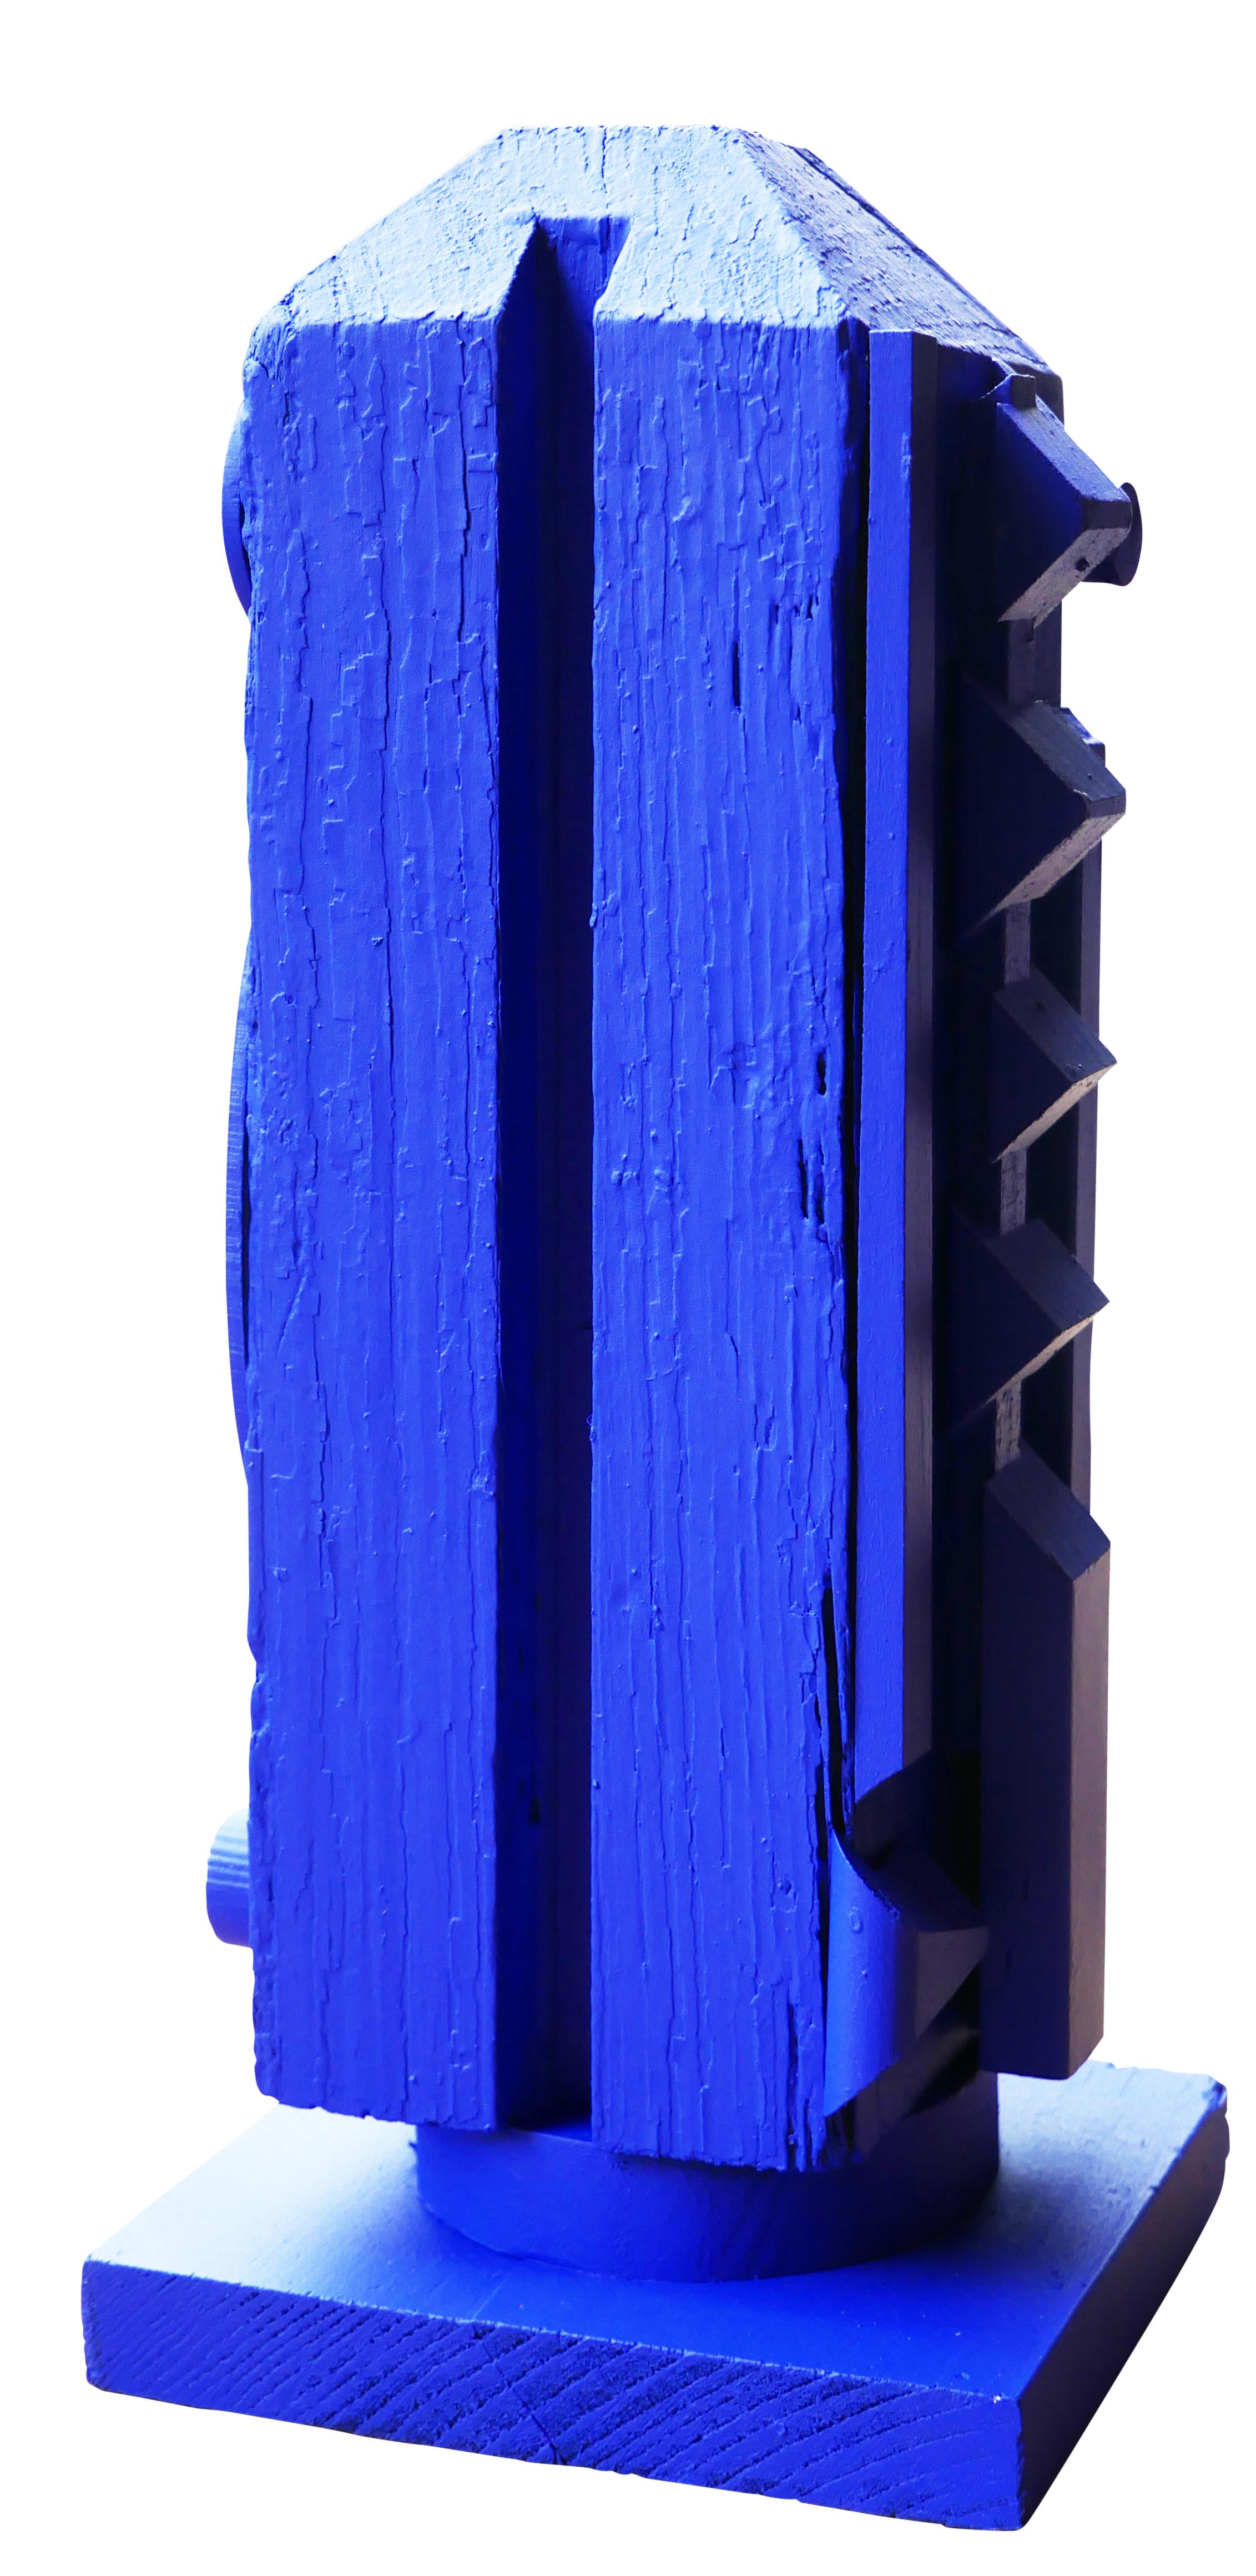 Bright Blue Geometric Abstract Freestanding Contemporary Sculpture For Sale 2